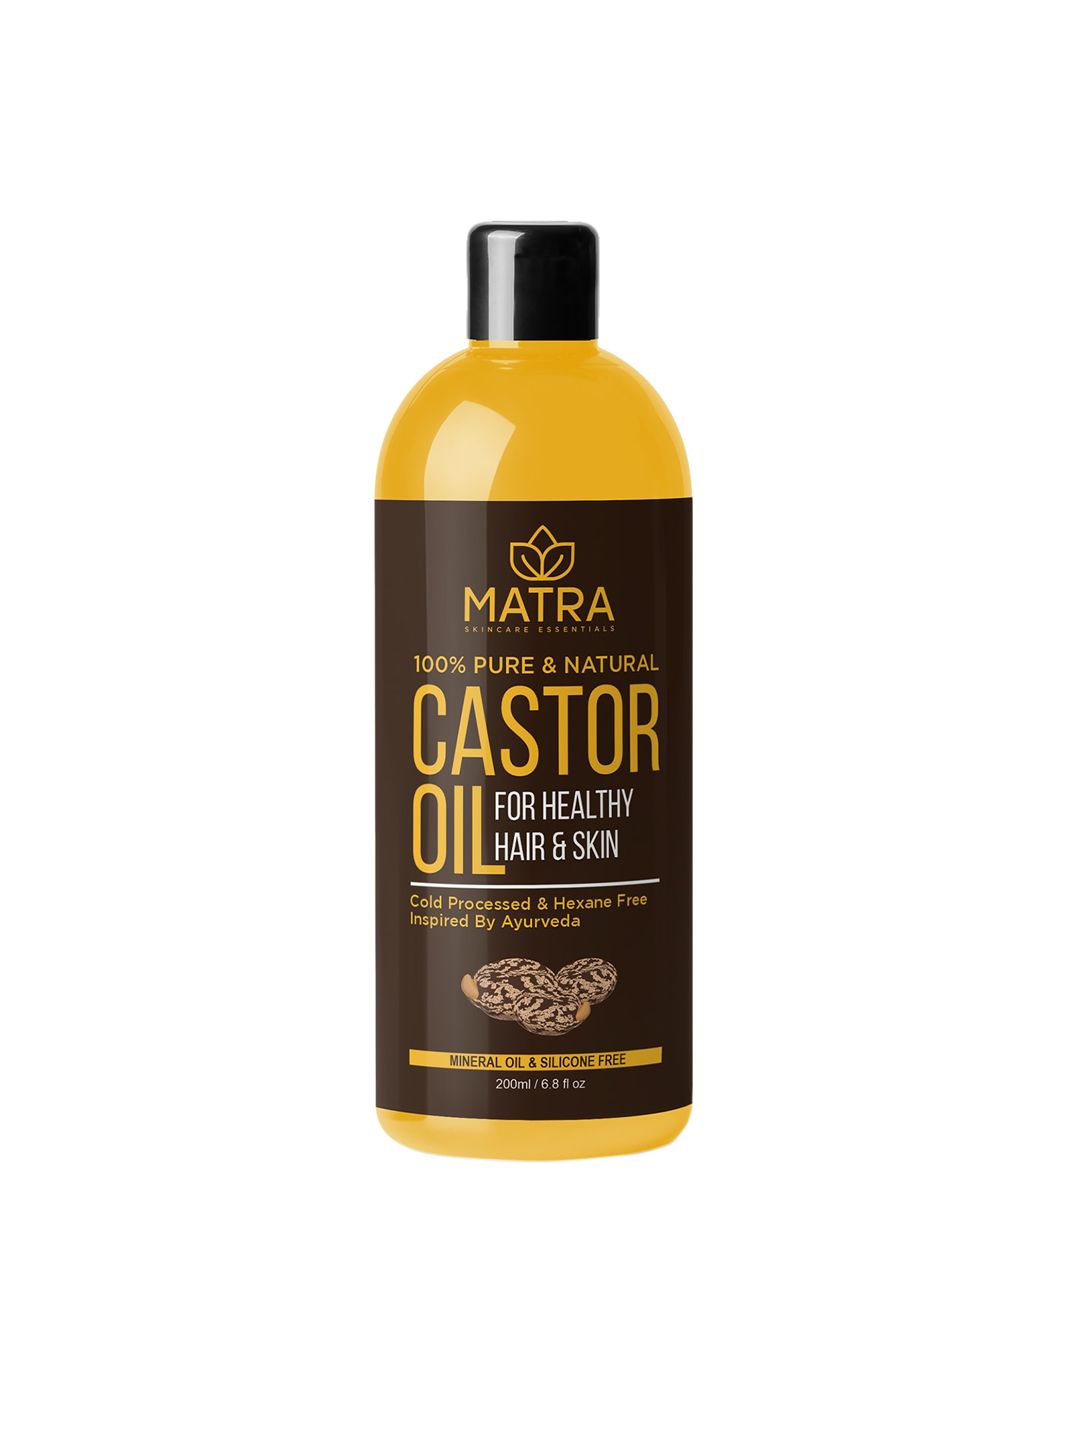 MATRA 100% Pure & Natural Castor Oil for Healthy Hair & Skin - 200 ml Price in India